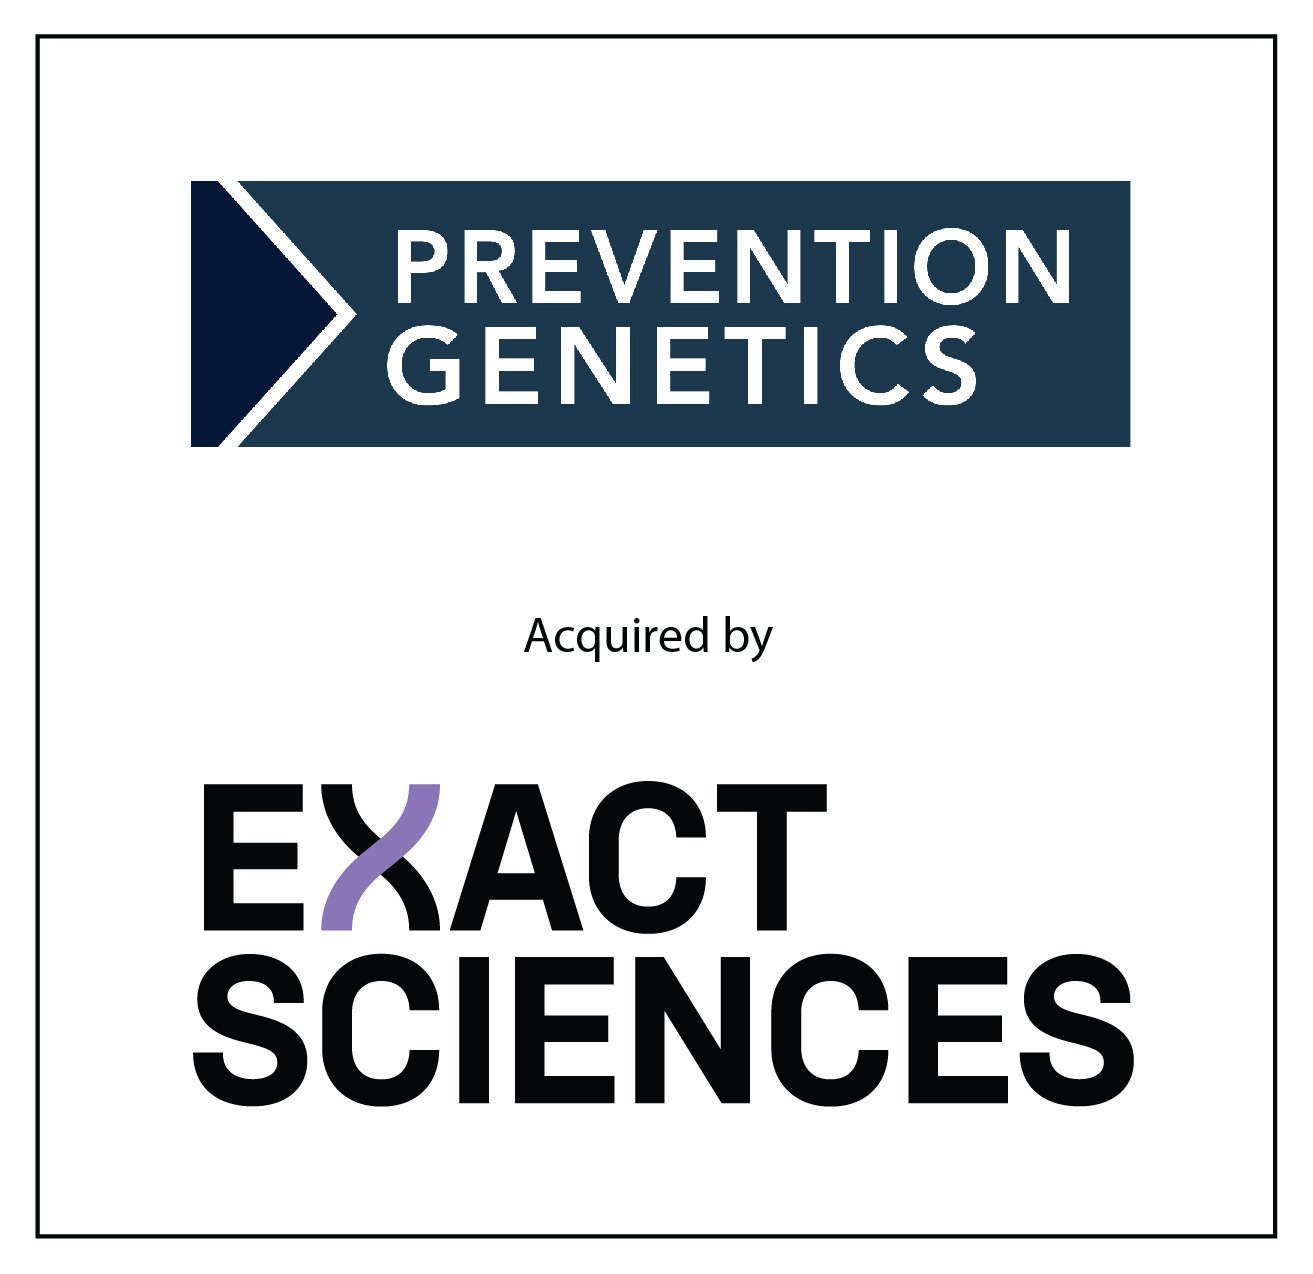 PreventionGenetics acquired by Exact Sciences to Enable Earlier Cancer Detection and Hereditary Cancer Testing